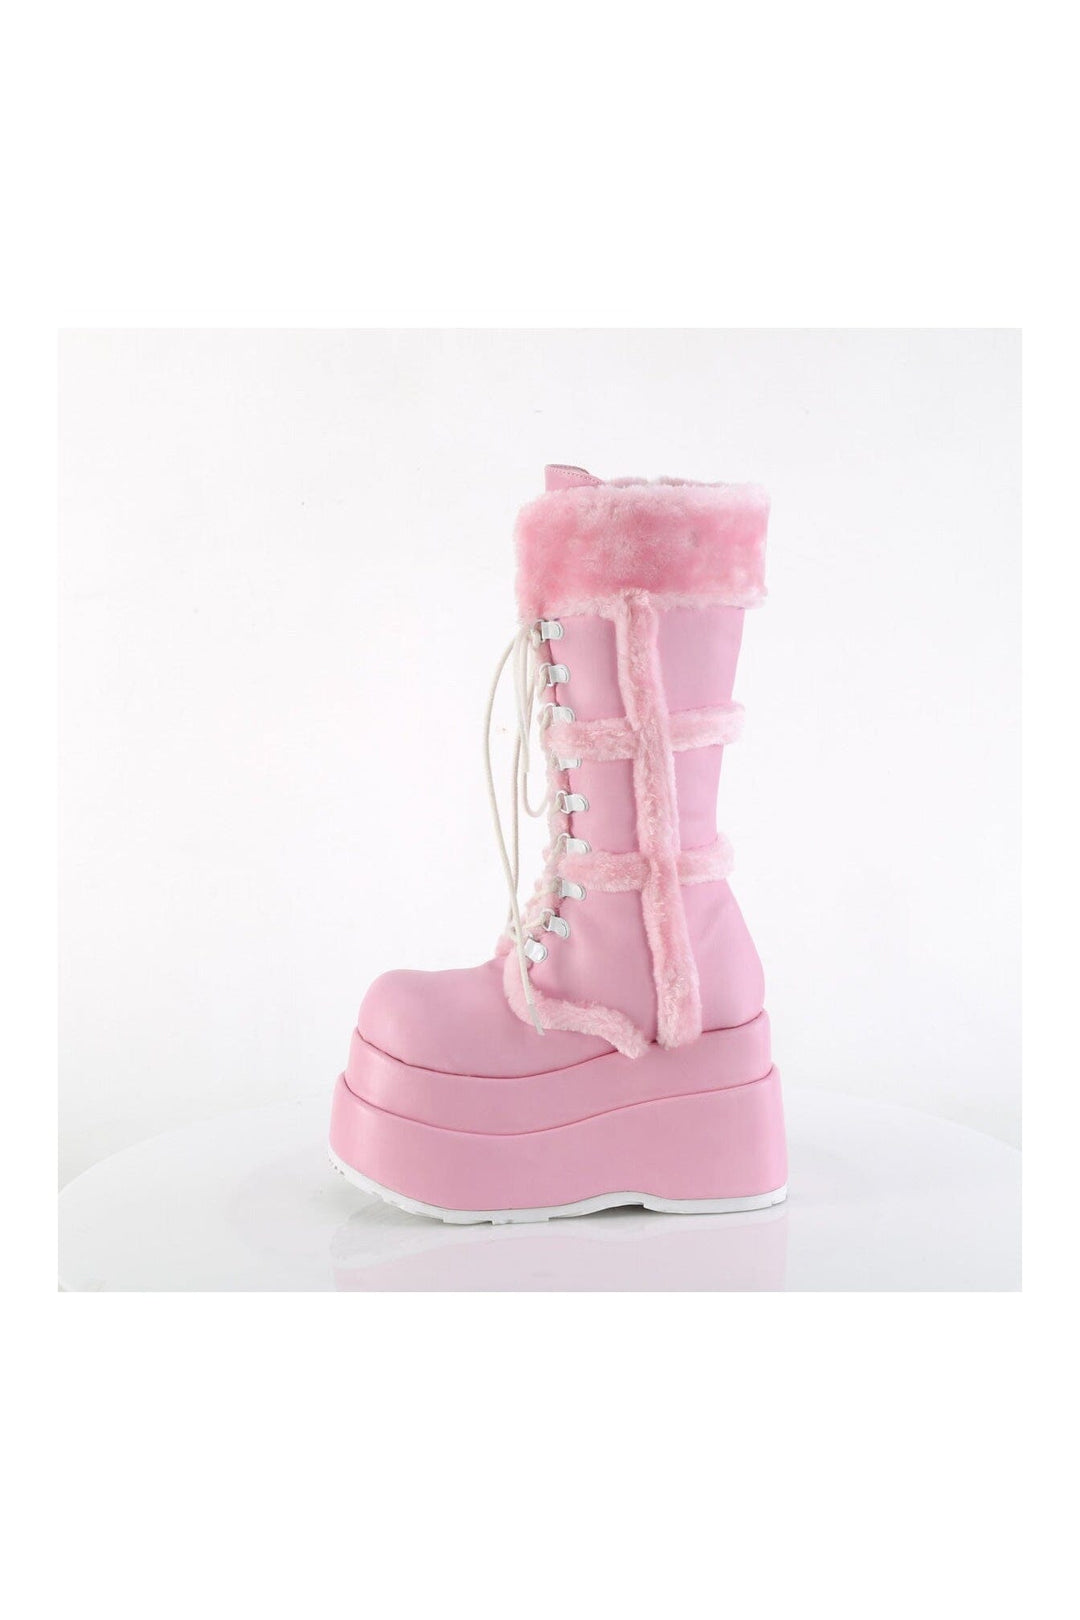 BEAR-202 Pink Vegan Leather Knee Boot-Knee Boots-Demonia-SEXYSHOES.COM